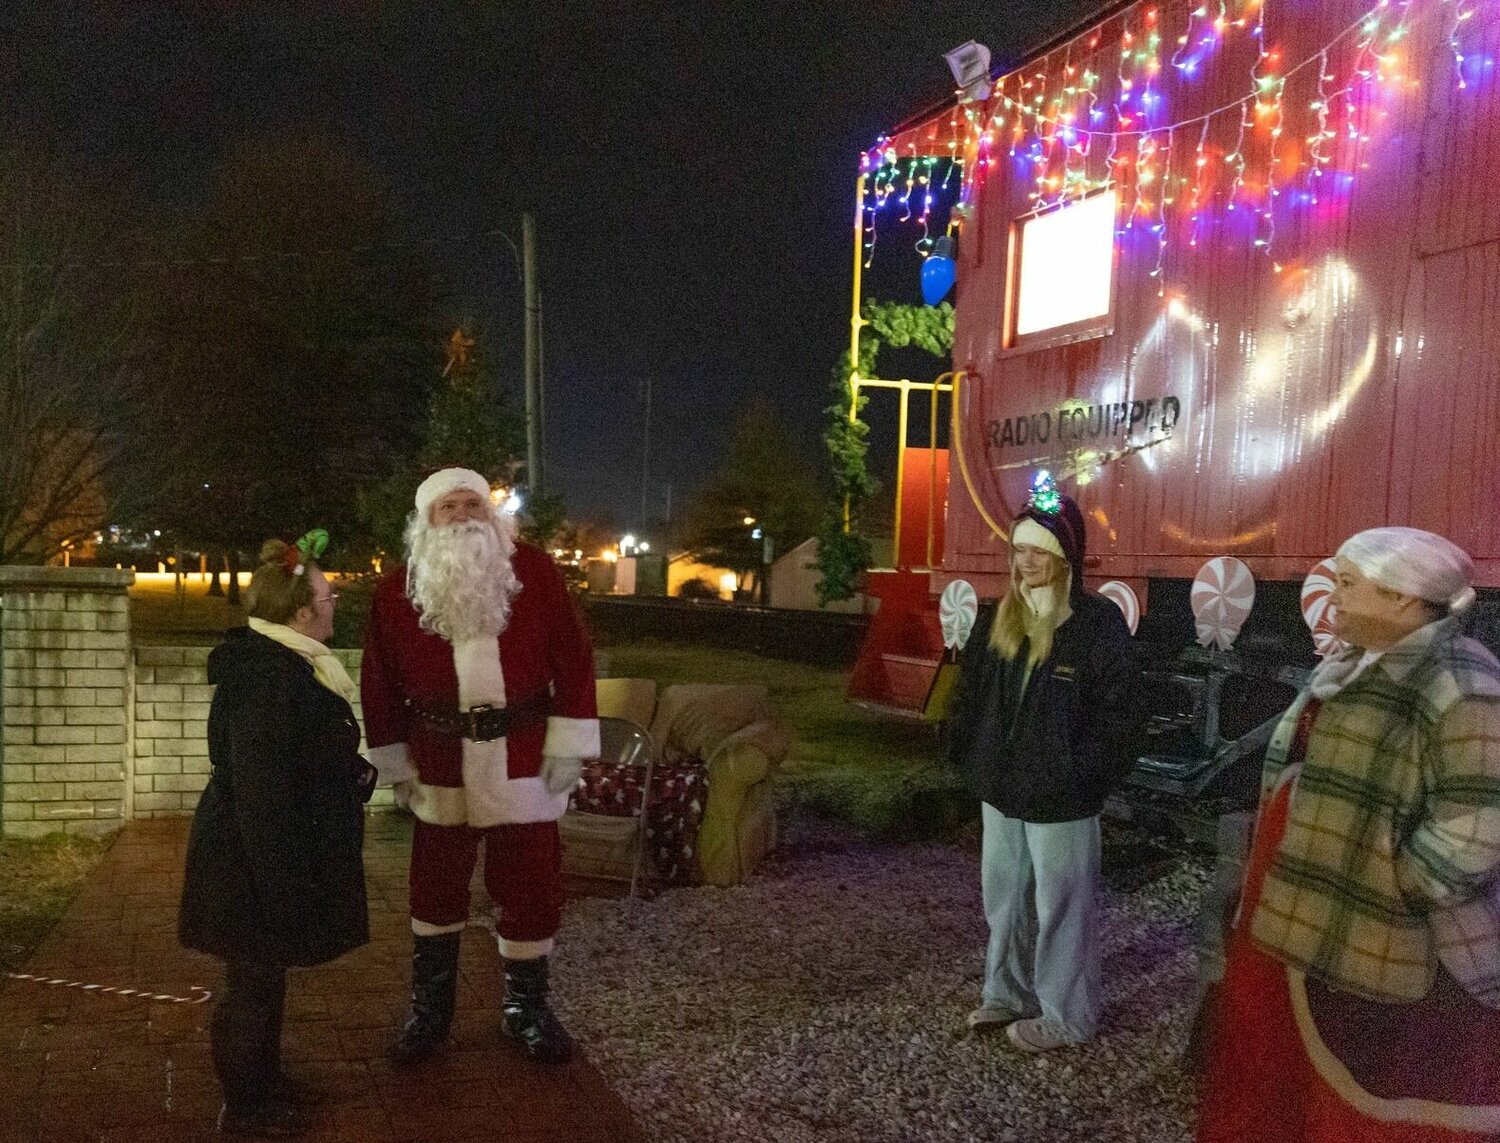 One attendee at the Rogersville Tree-Lighting Ceremony asked Old St. Nick if they were on the nice list... Of course!